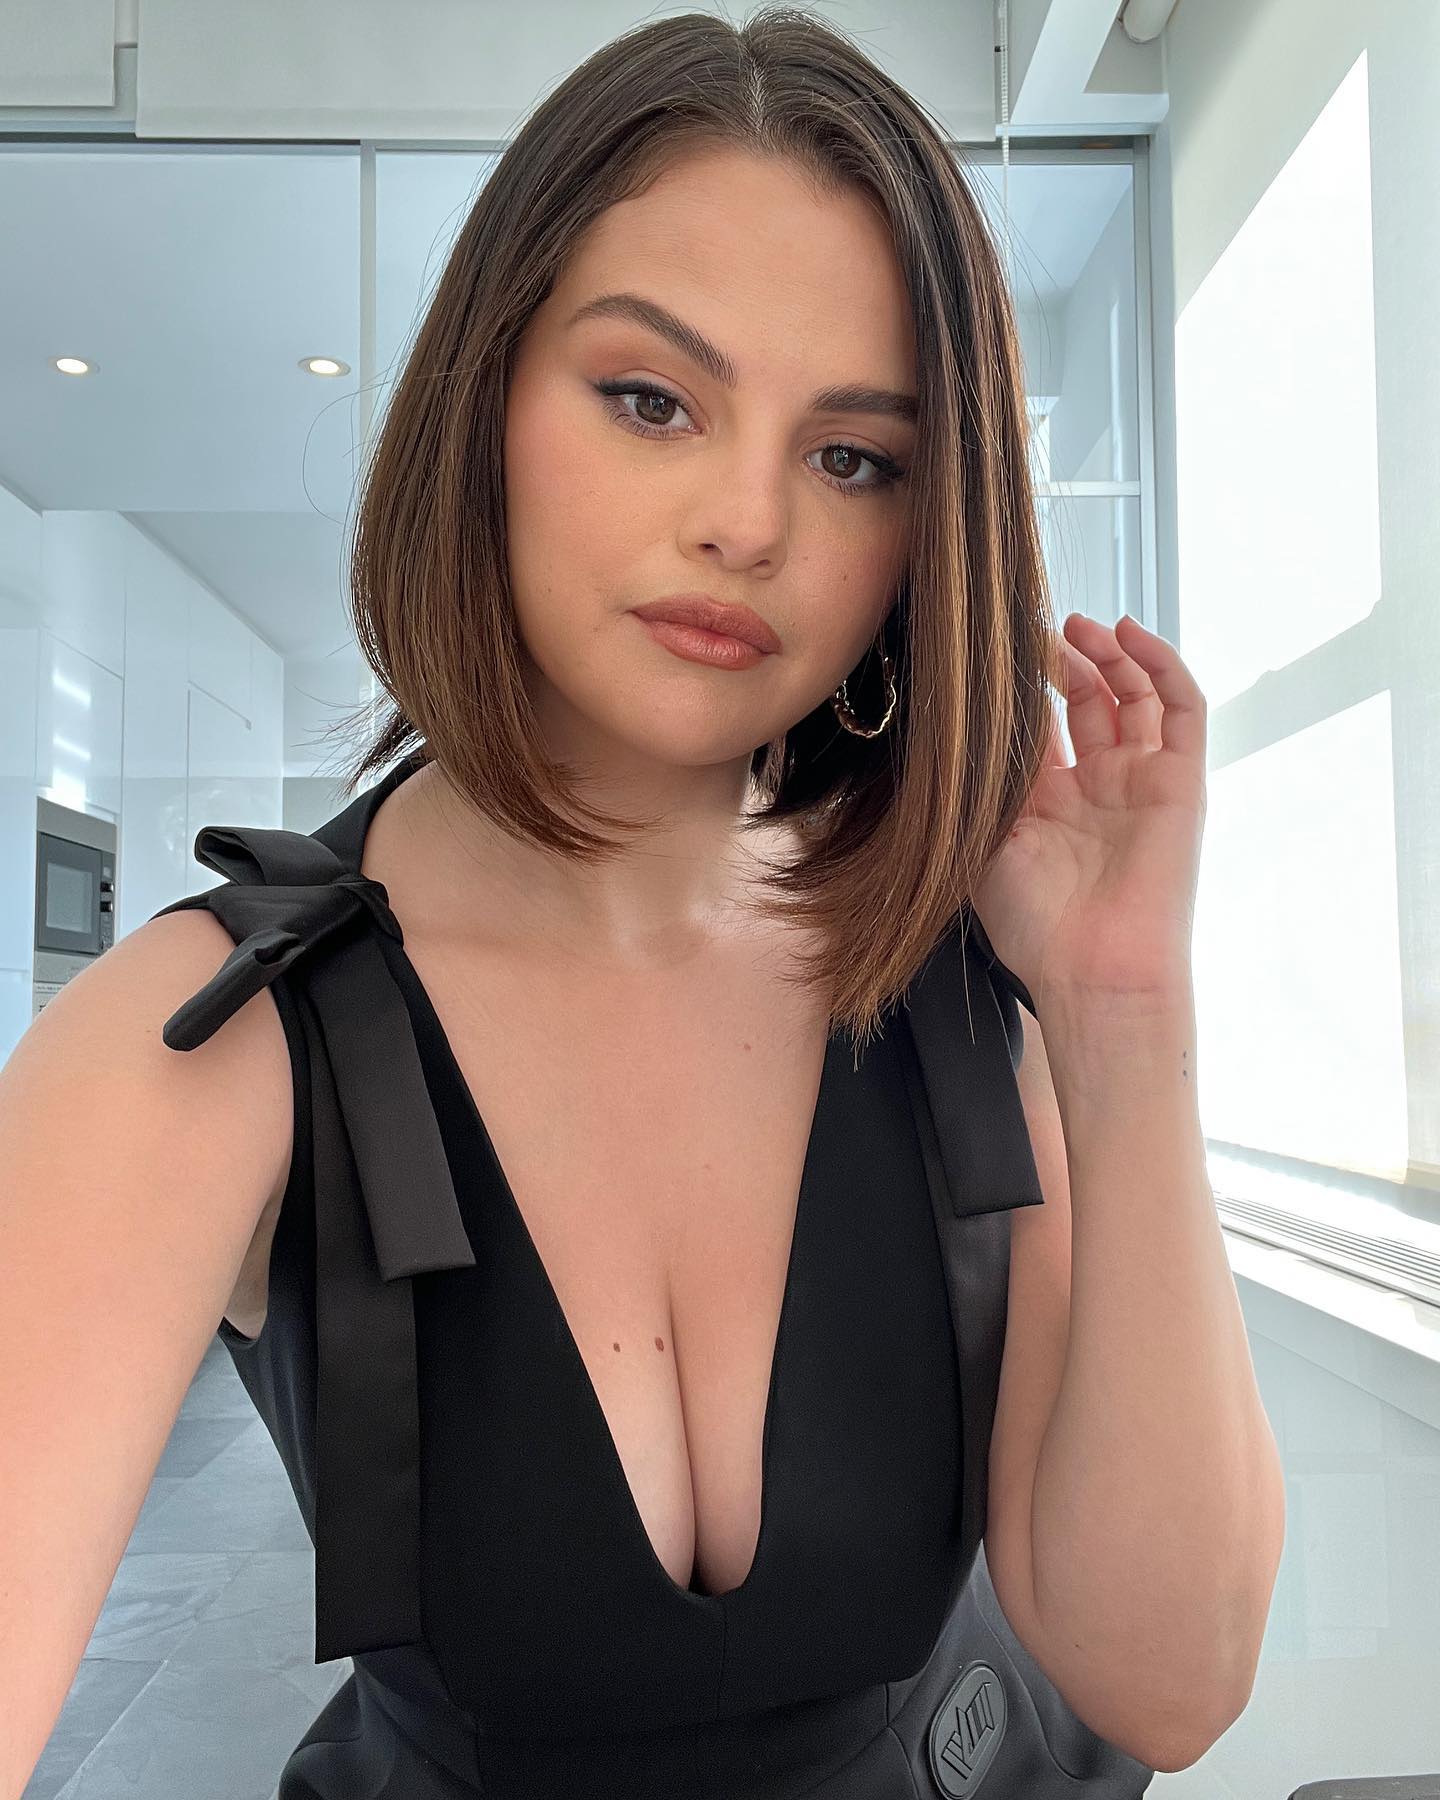 Selena Gomez Braless: Photos of the Singer Not Wearing a Bra